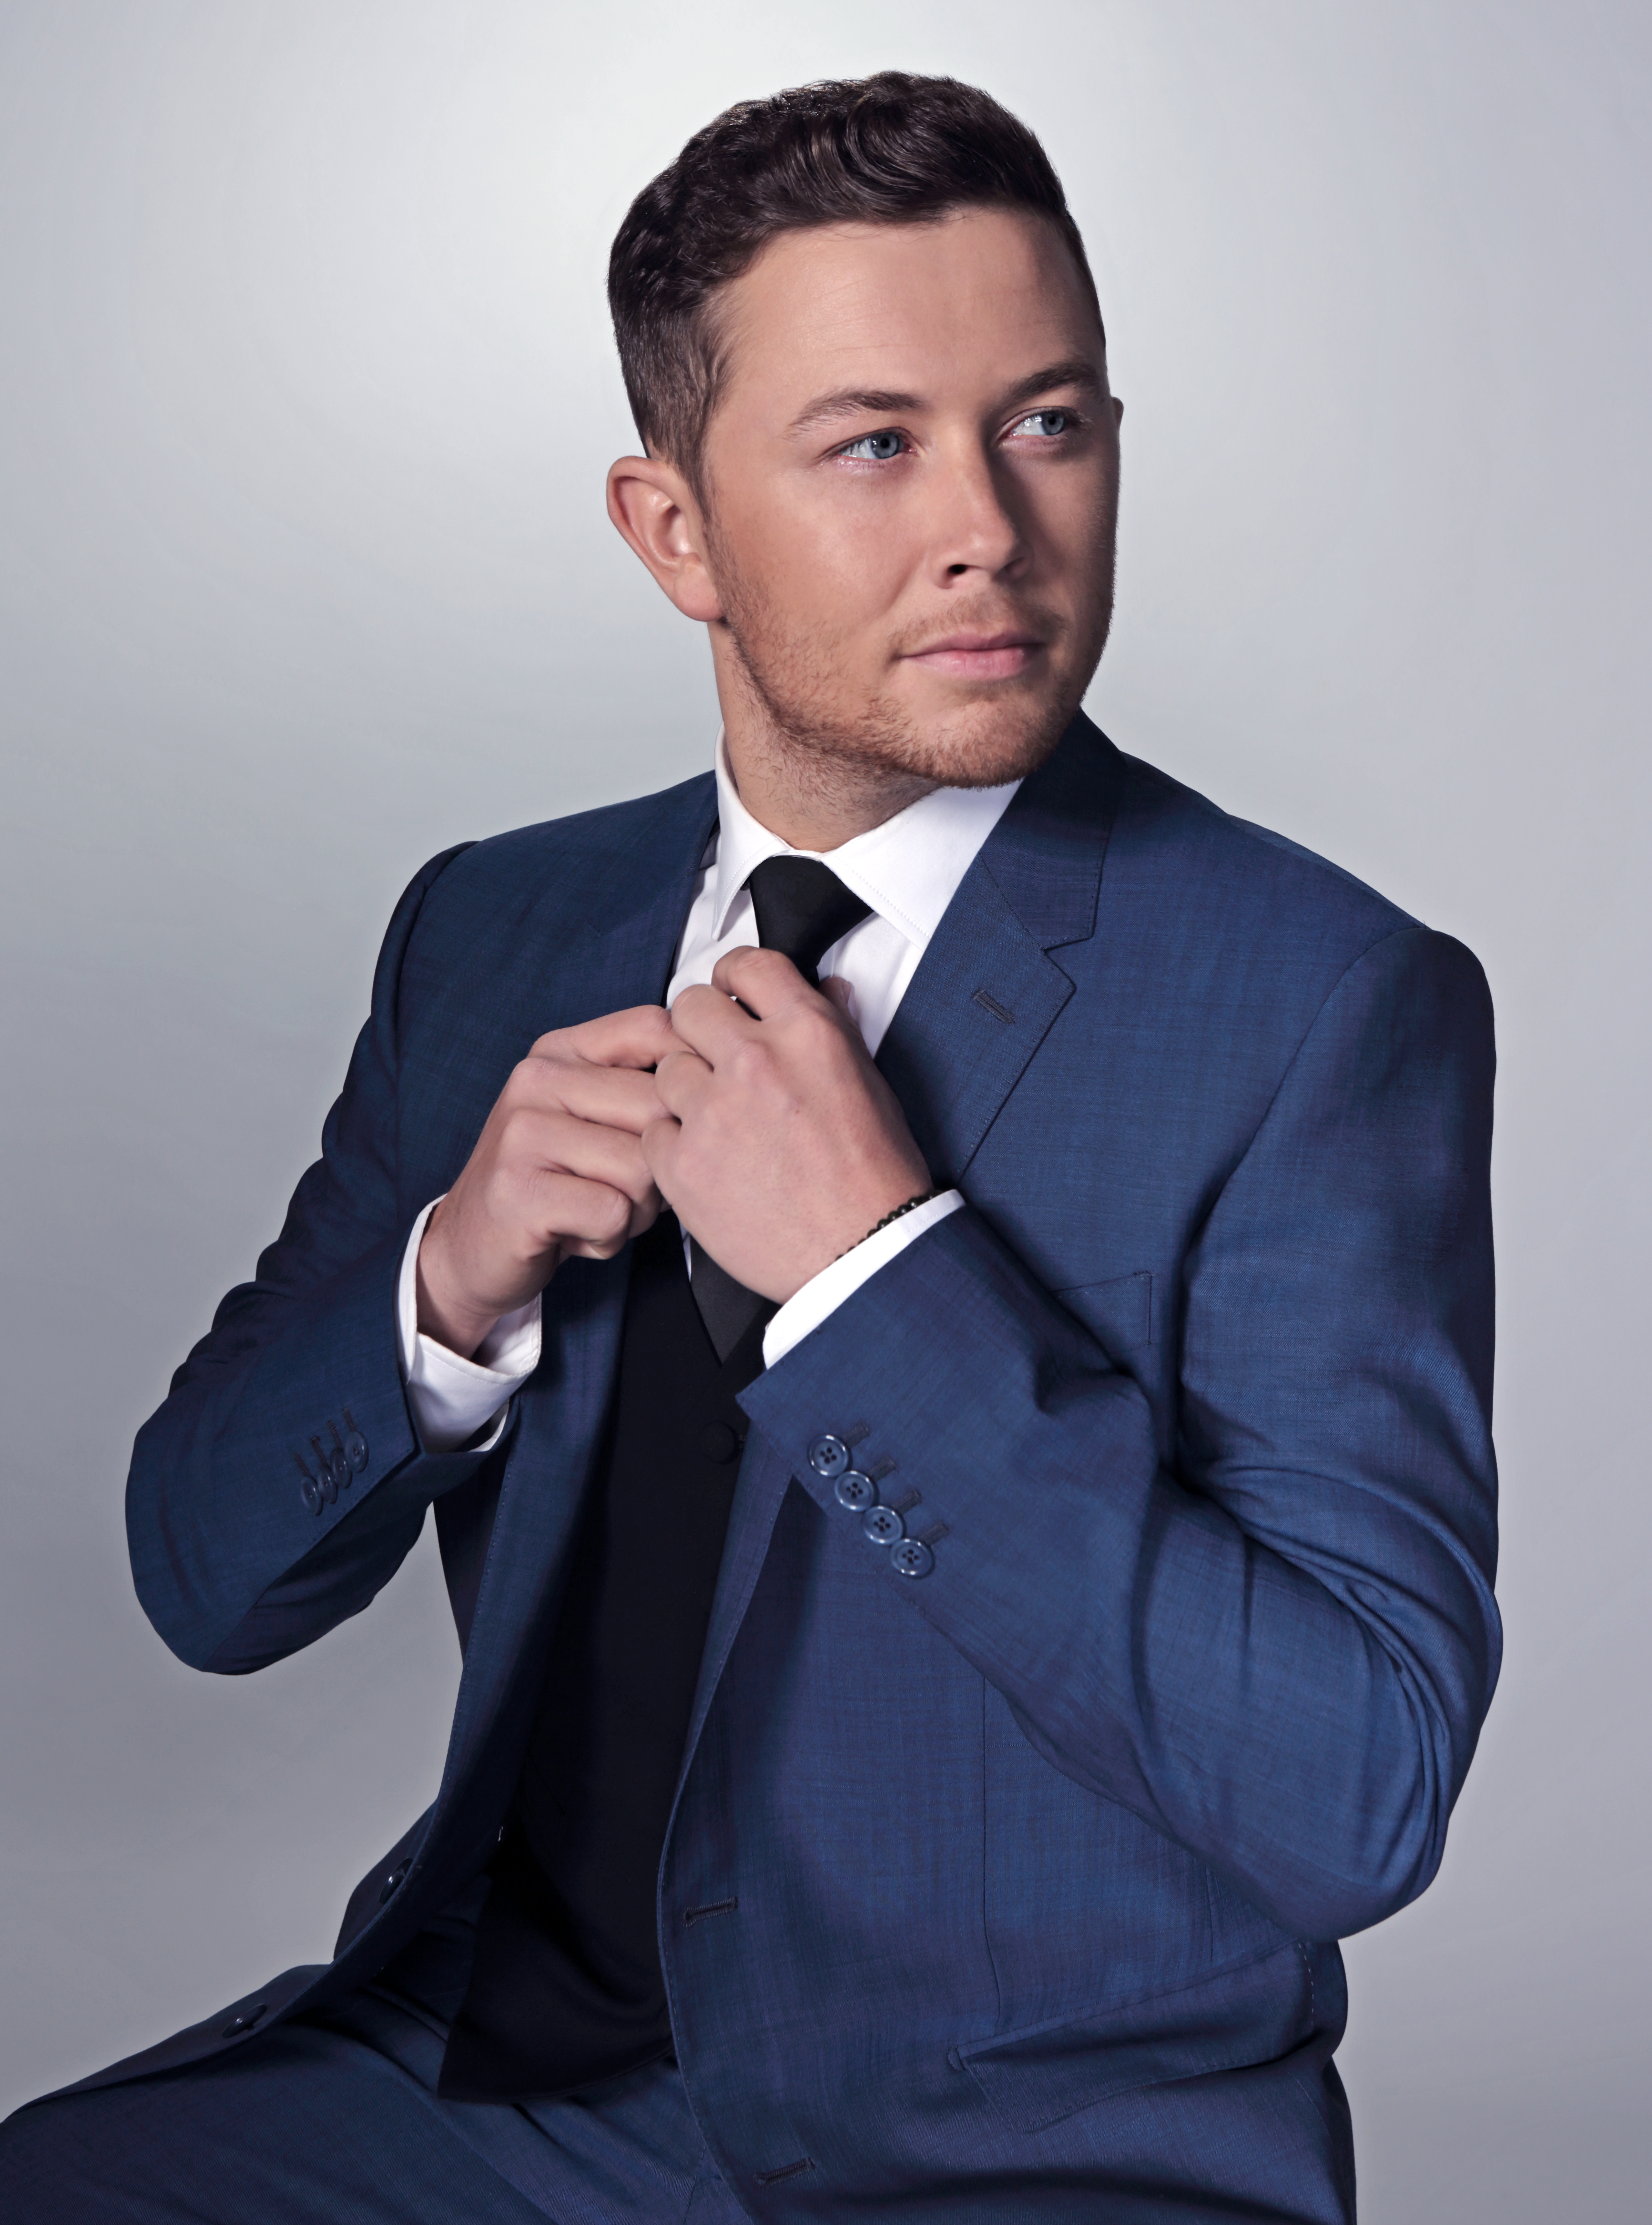 Scotty in a blue suit adjusting his tie